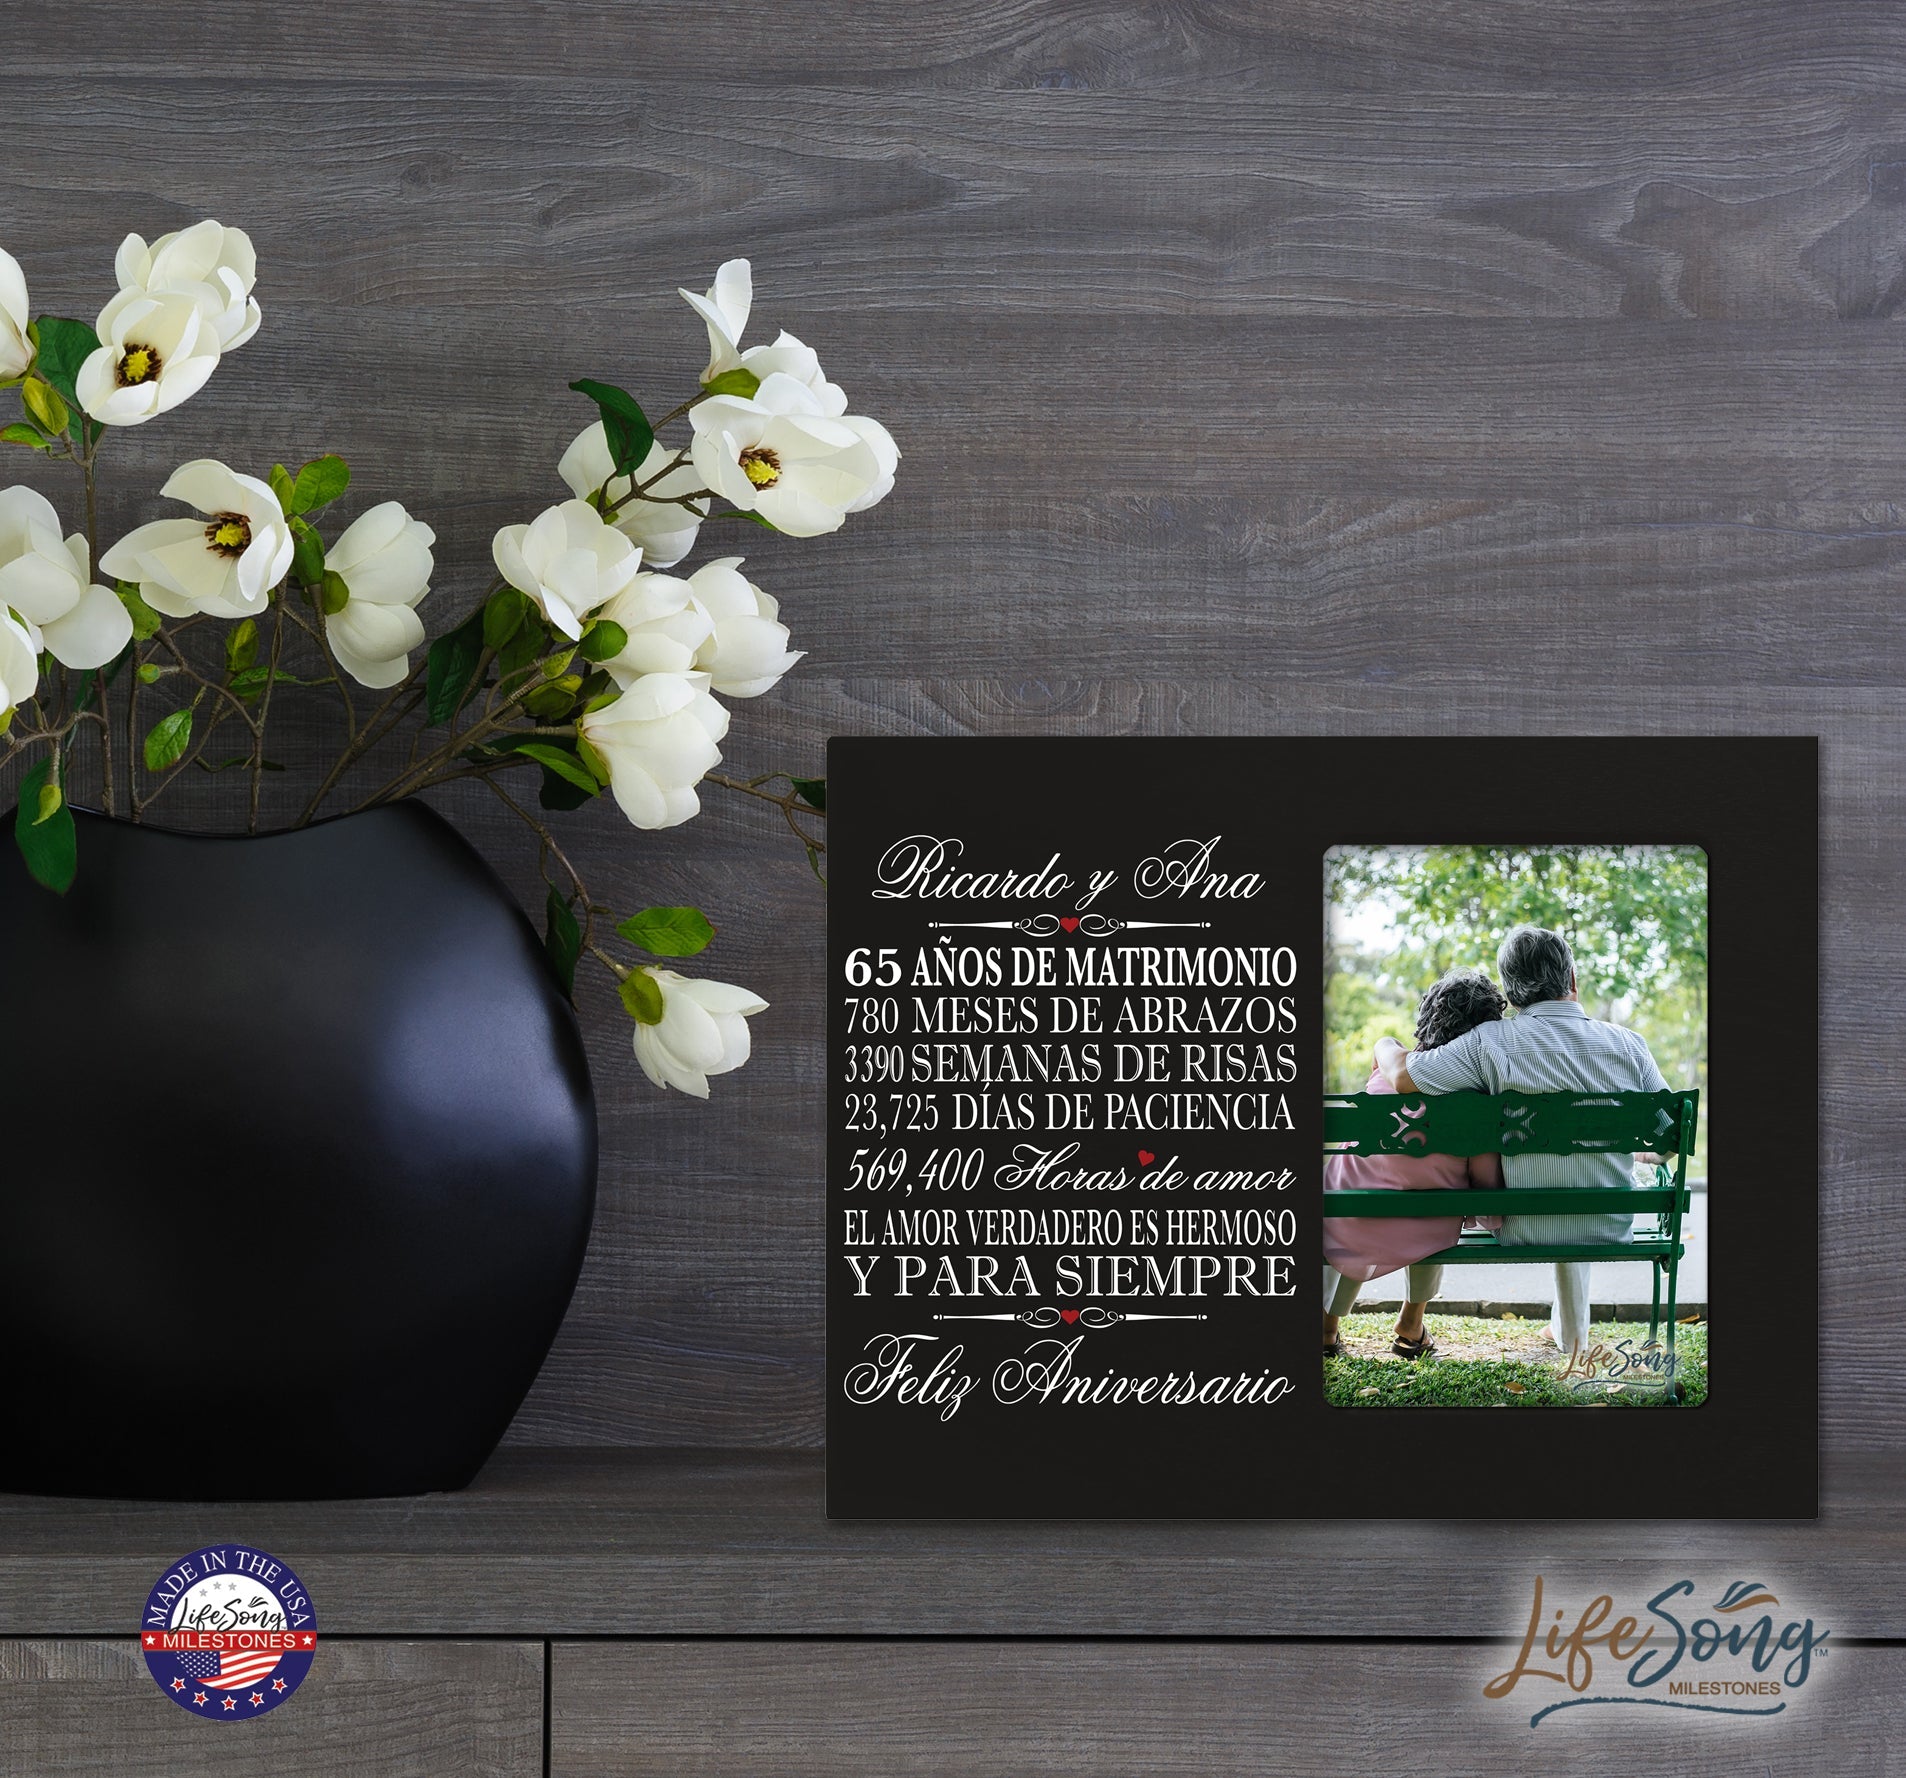 Personalized Anniversary Frames with Spanish Verse - 65th Anniversary - LifeSong Milestones